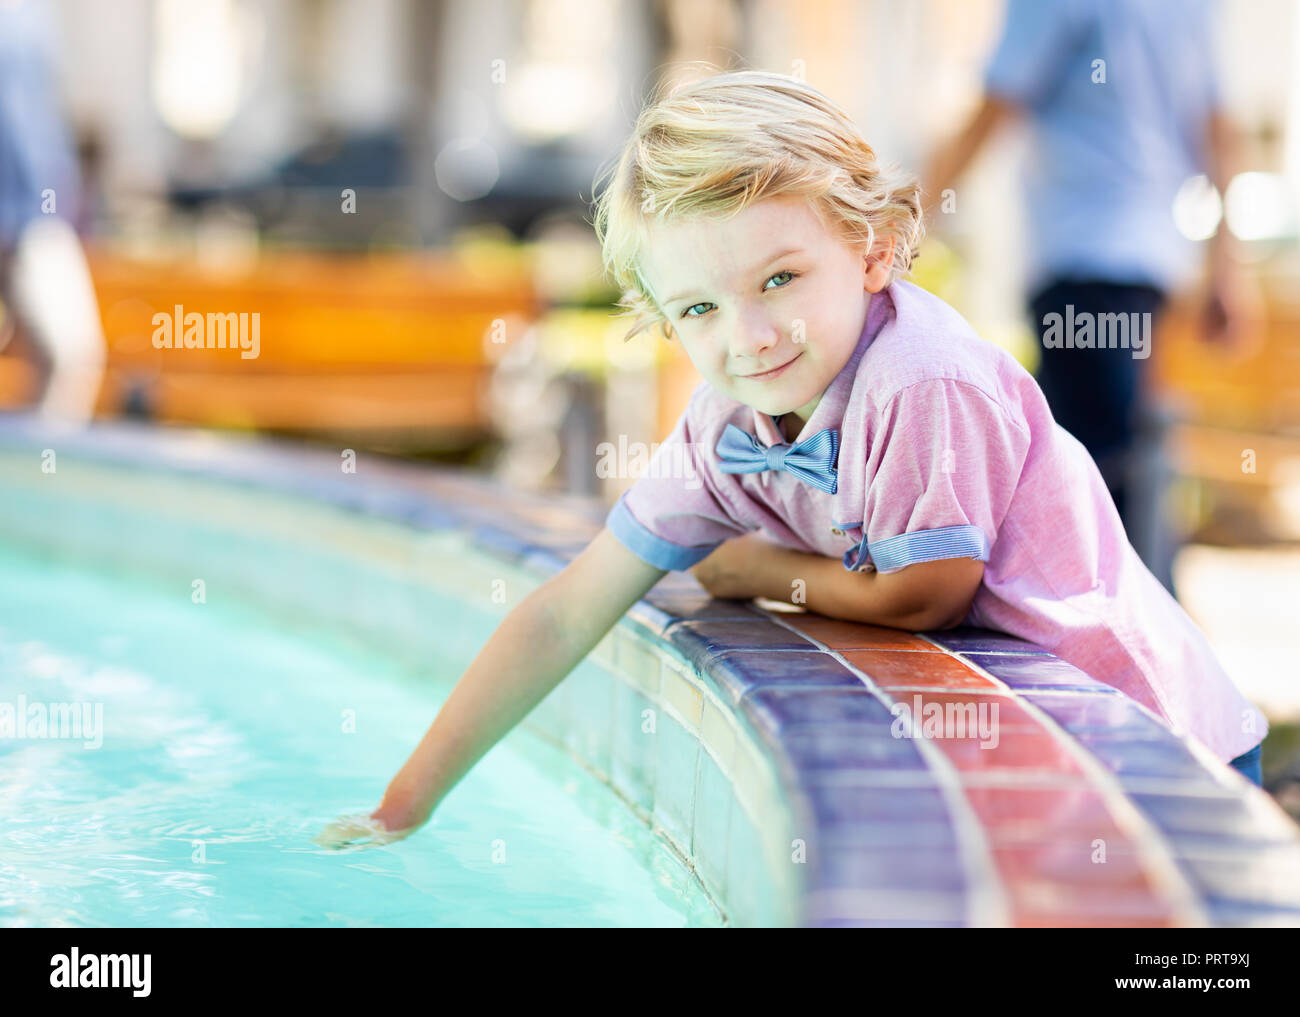 Cute Young Caucasian Boy Enjoying The Fountain At The Park. Stock Photo